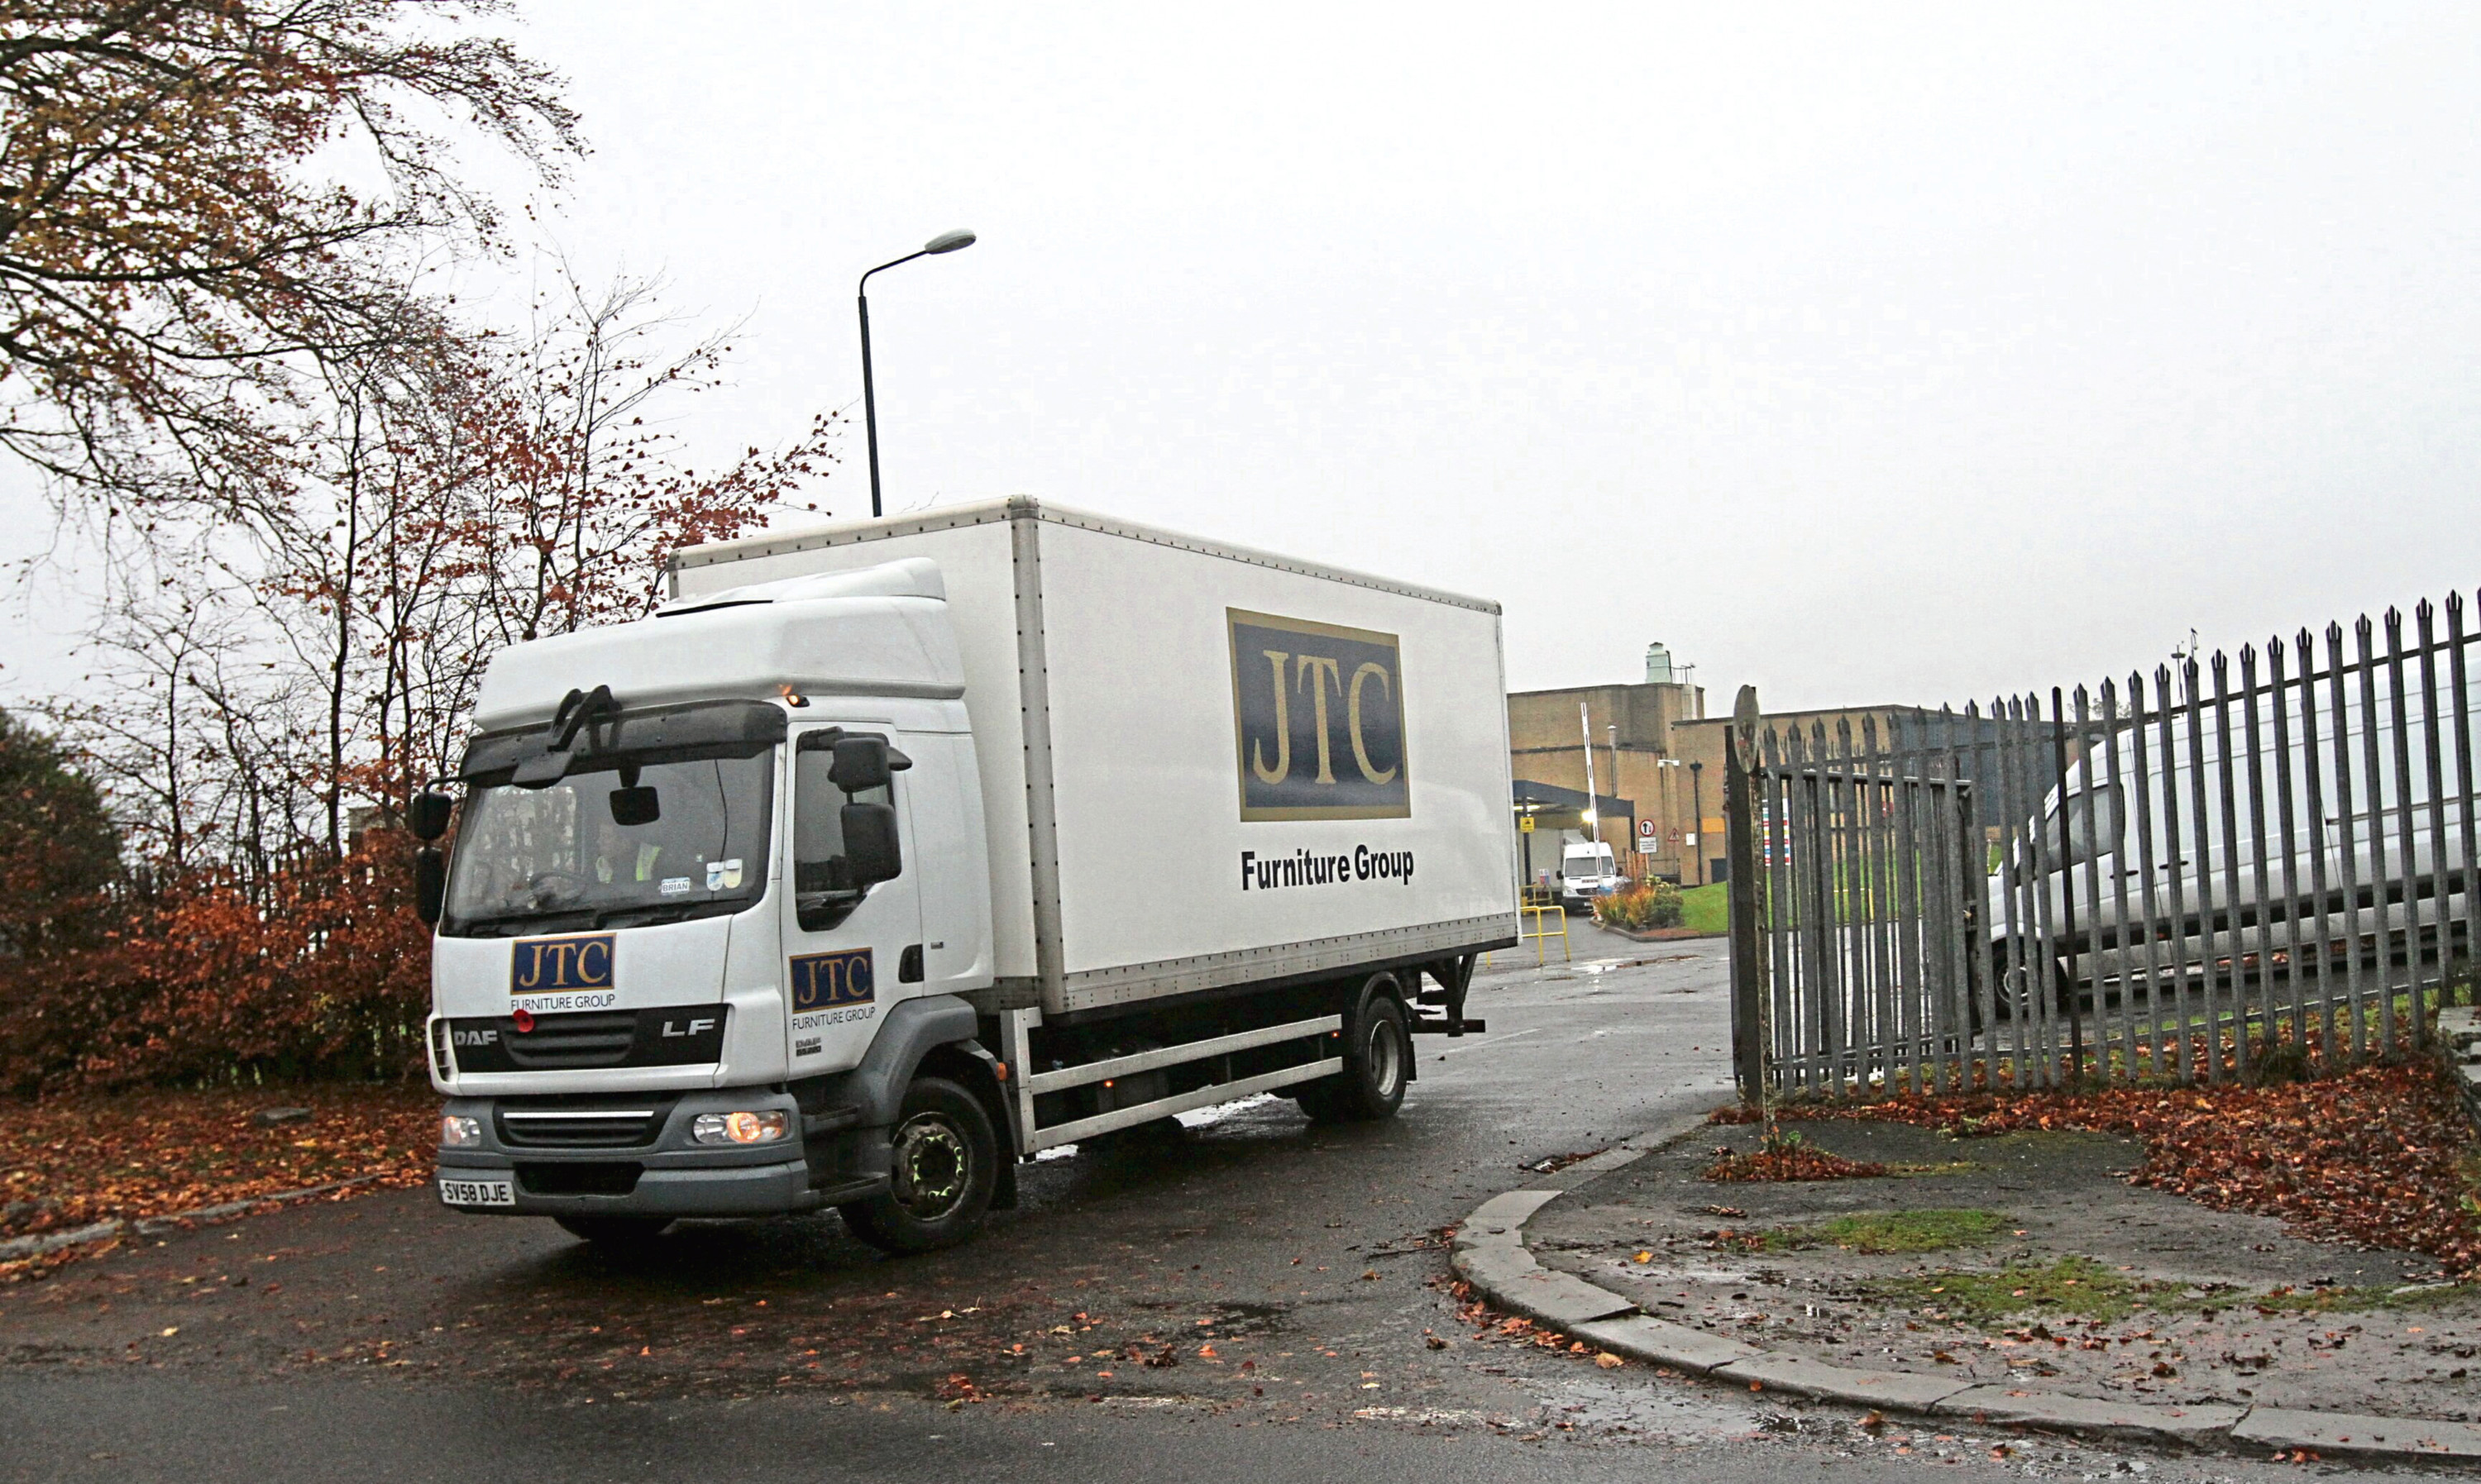 A JTC Furniture Group lorry. The company is based at the former Timex factory in Dundee